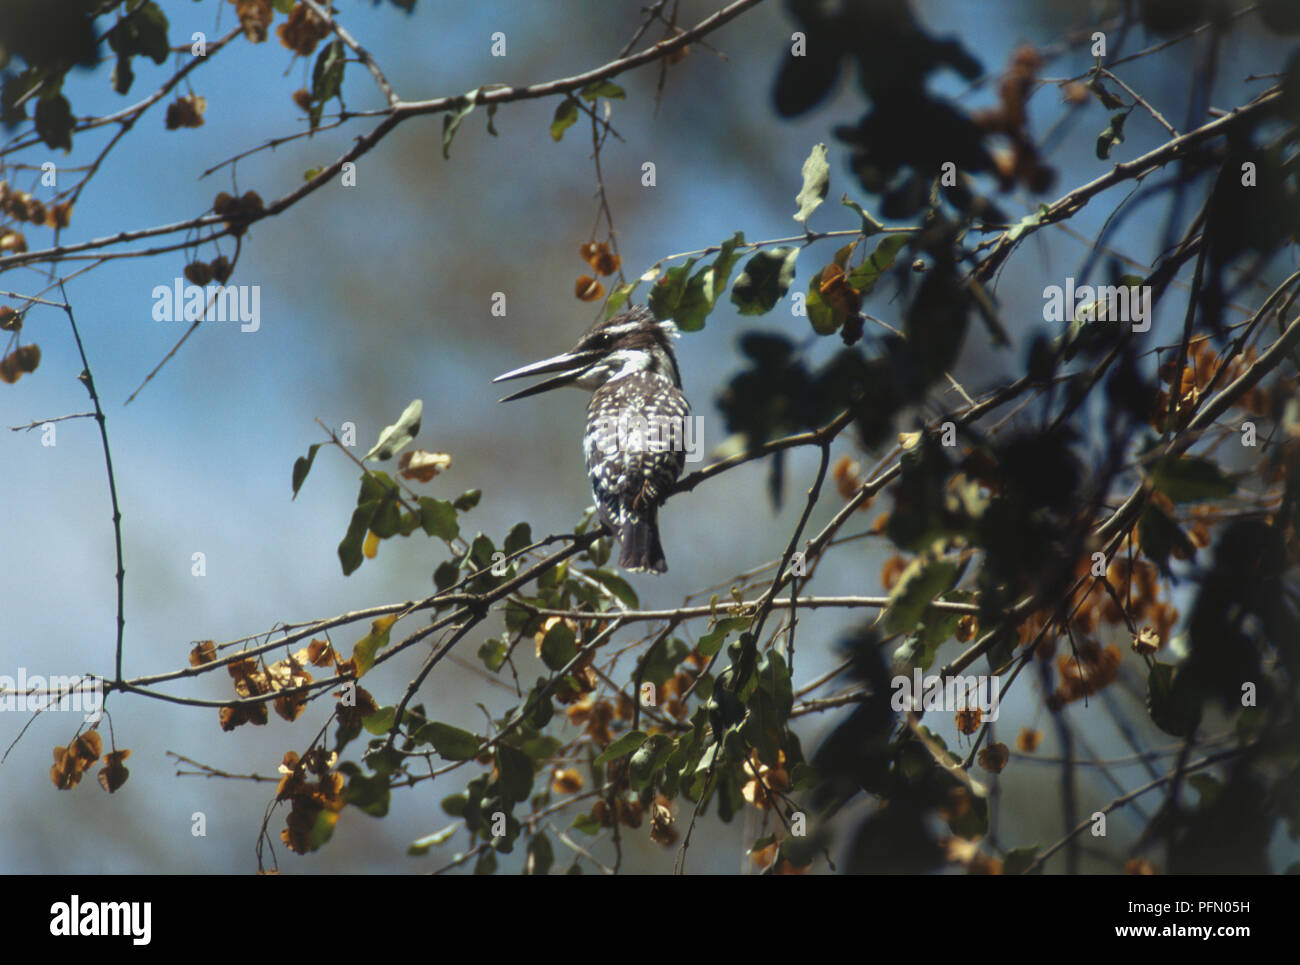 Rear view of Pied Kingfisher, Ceryle rudis, black and white speckled feathers, long thin bill, perching on leafy branch in tree, head and beak in profile. Stock Photo